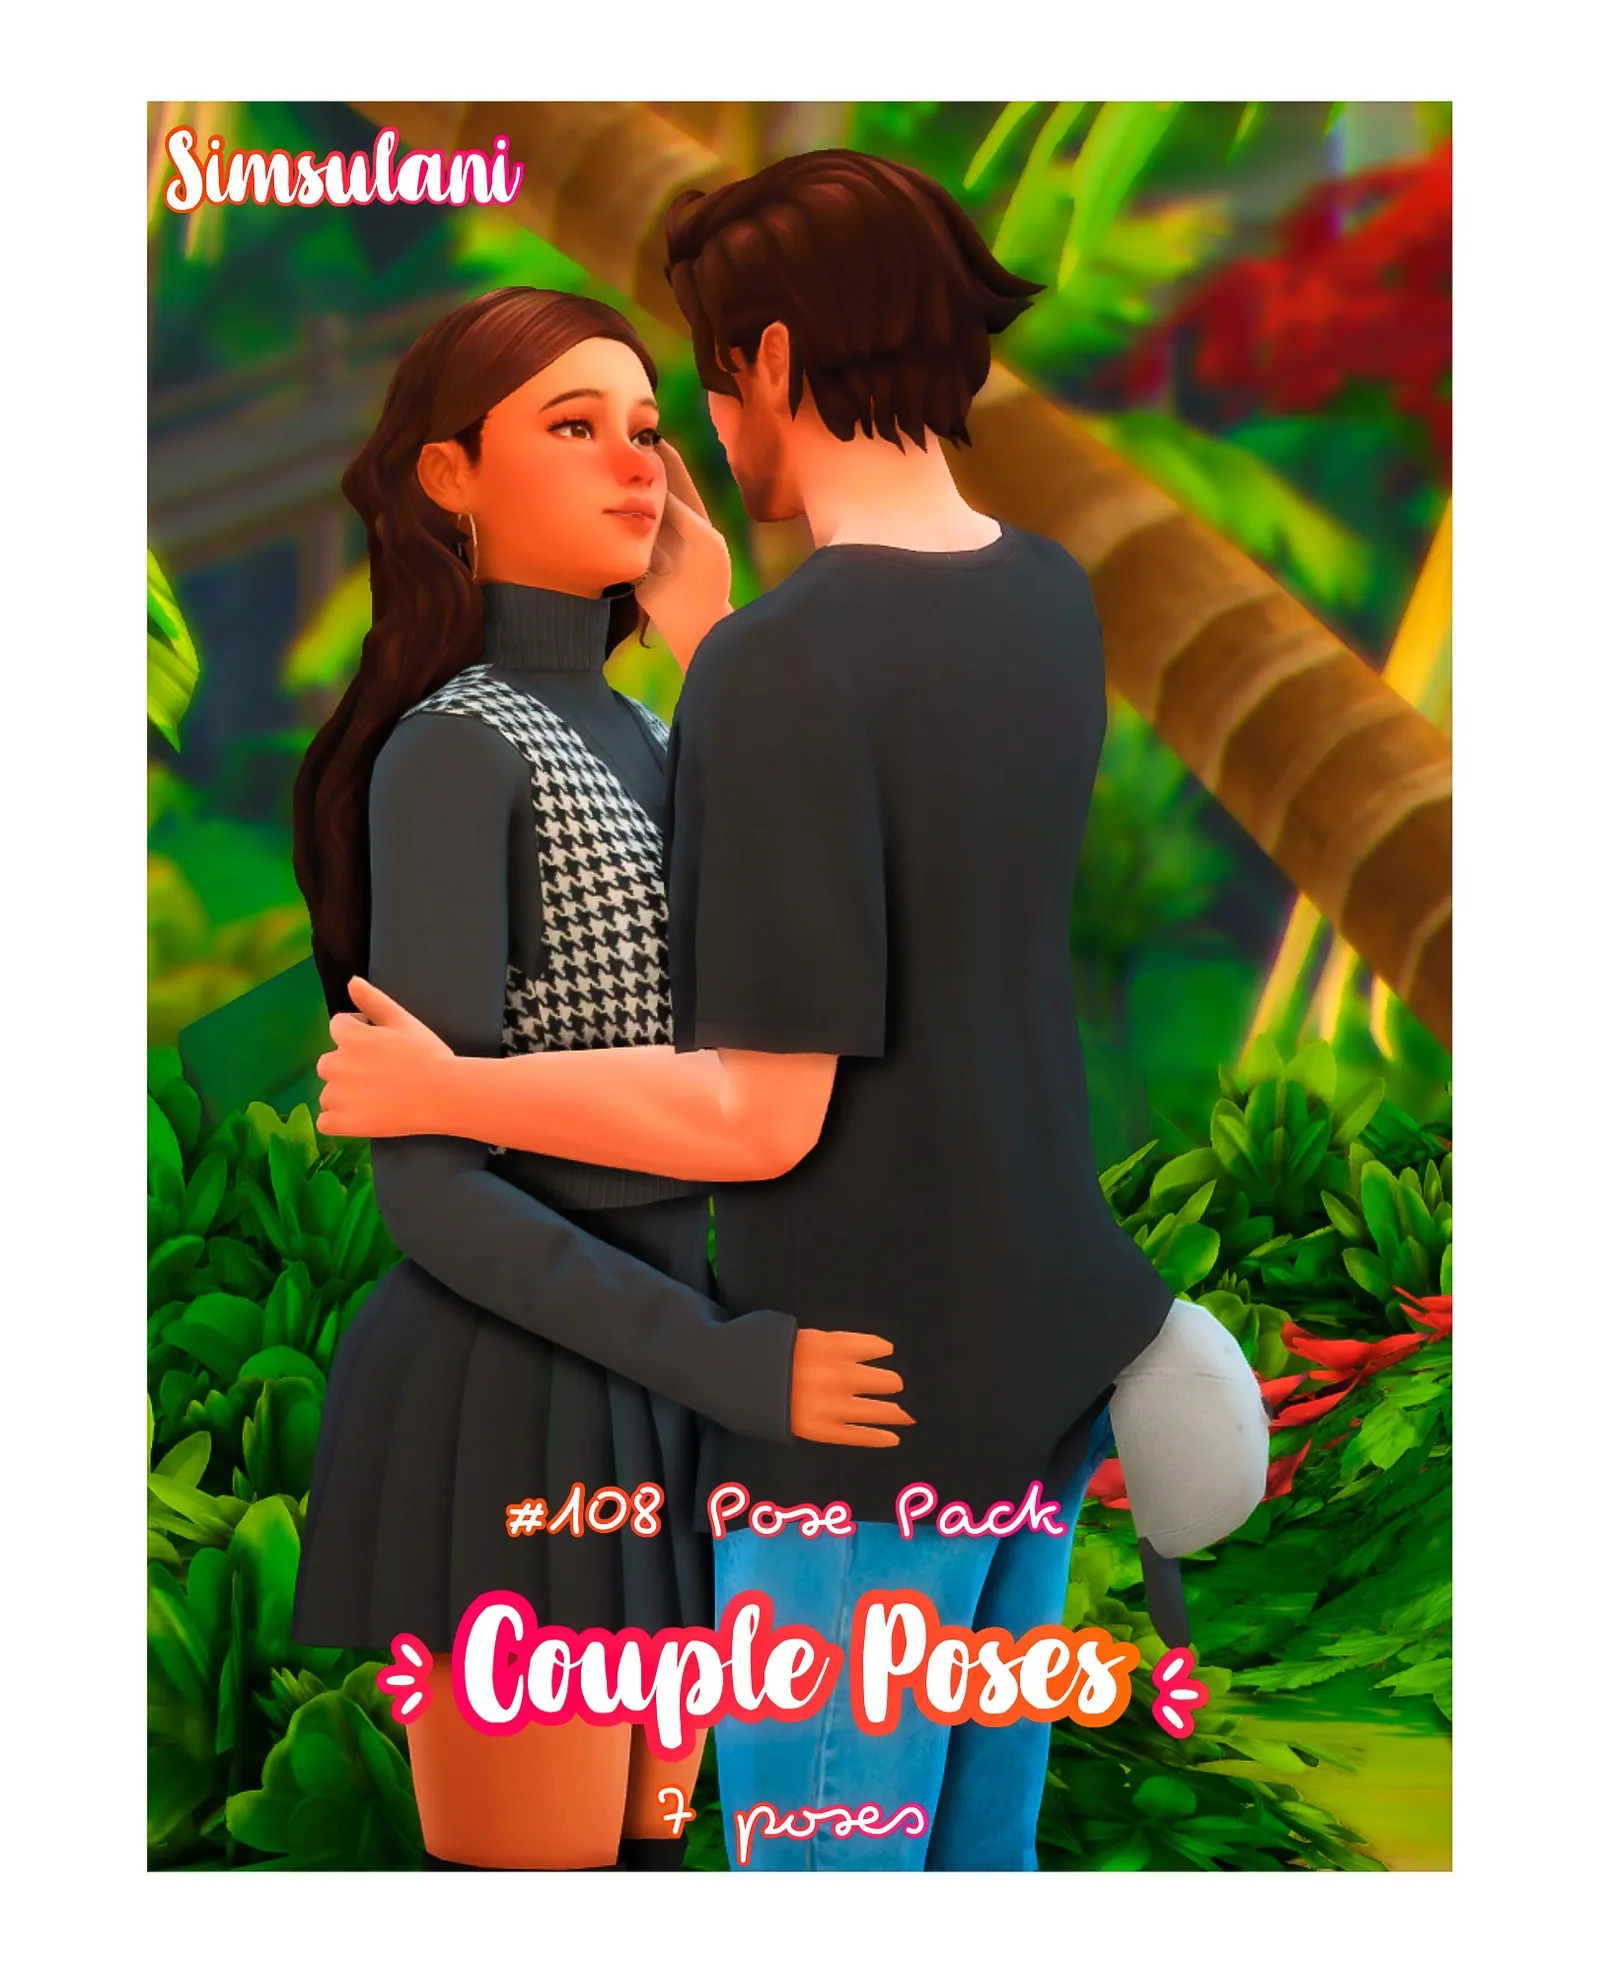 #108 Pose Pack "Couple Poses" ?